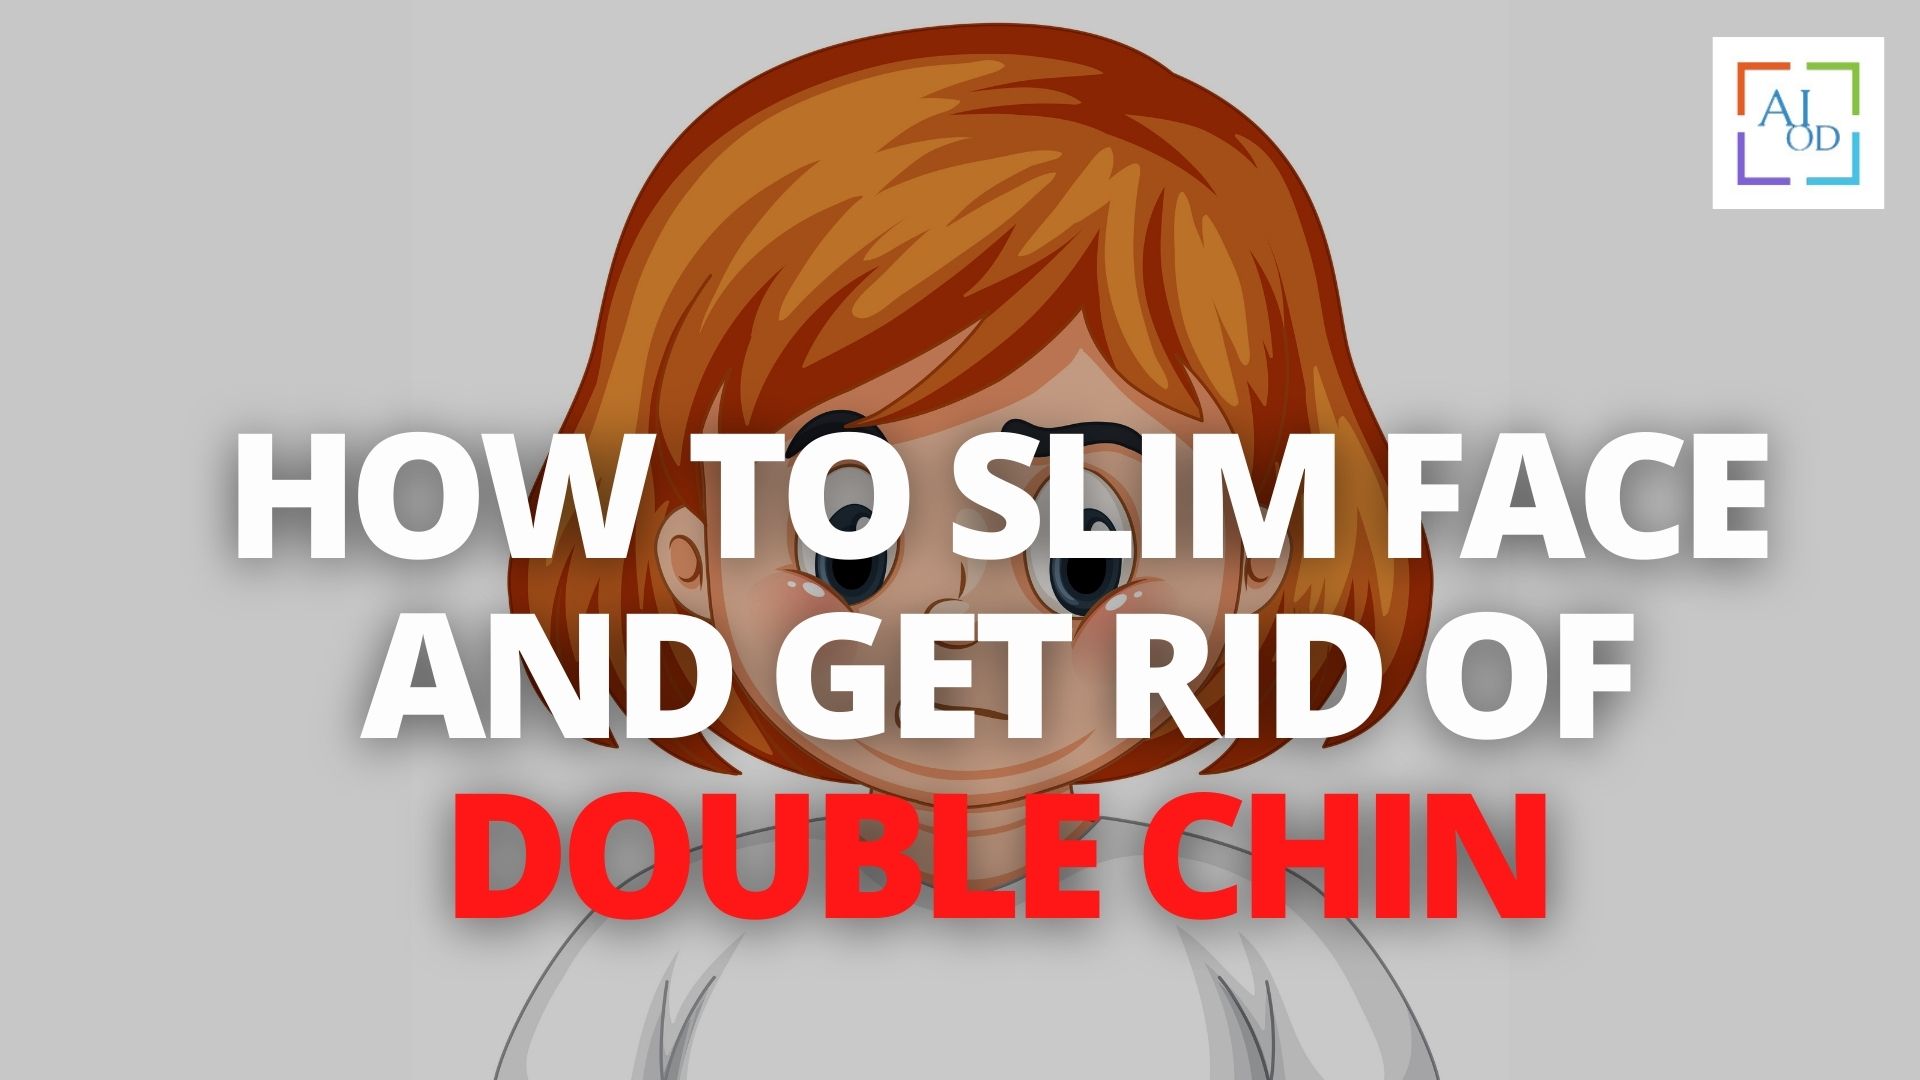 HOW TO SLIM FACE AND GET RID OF DOUBLE CHIN